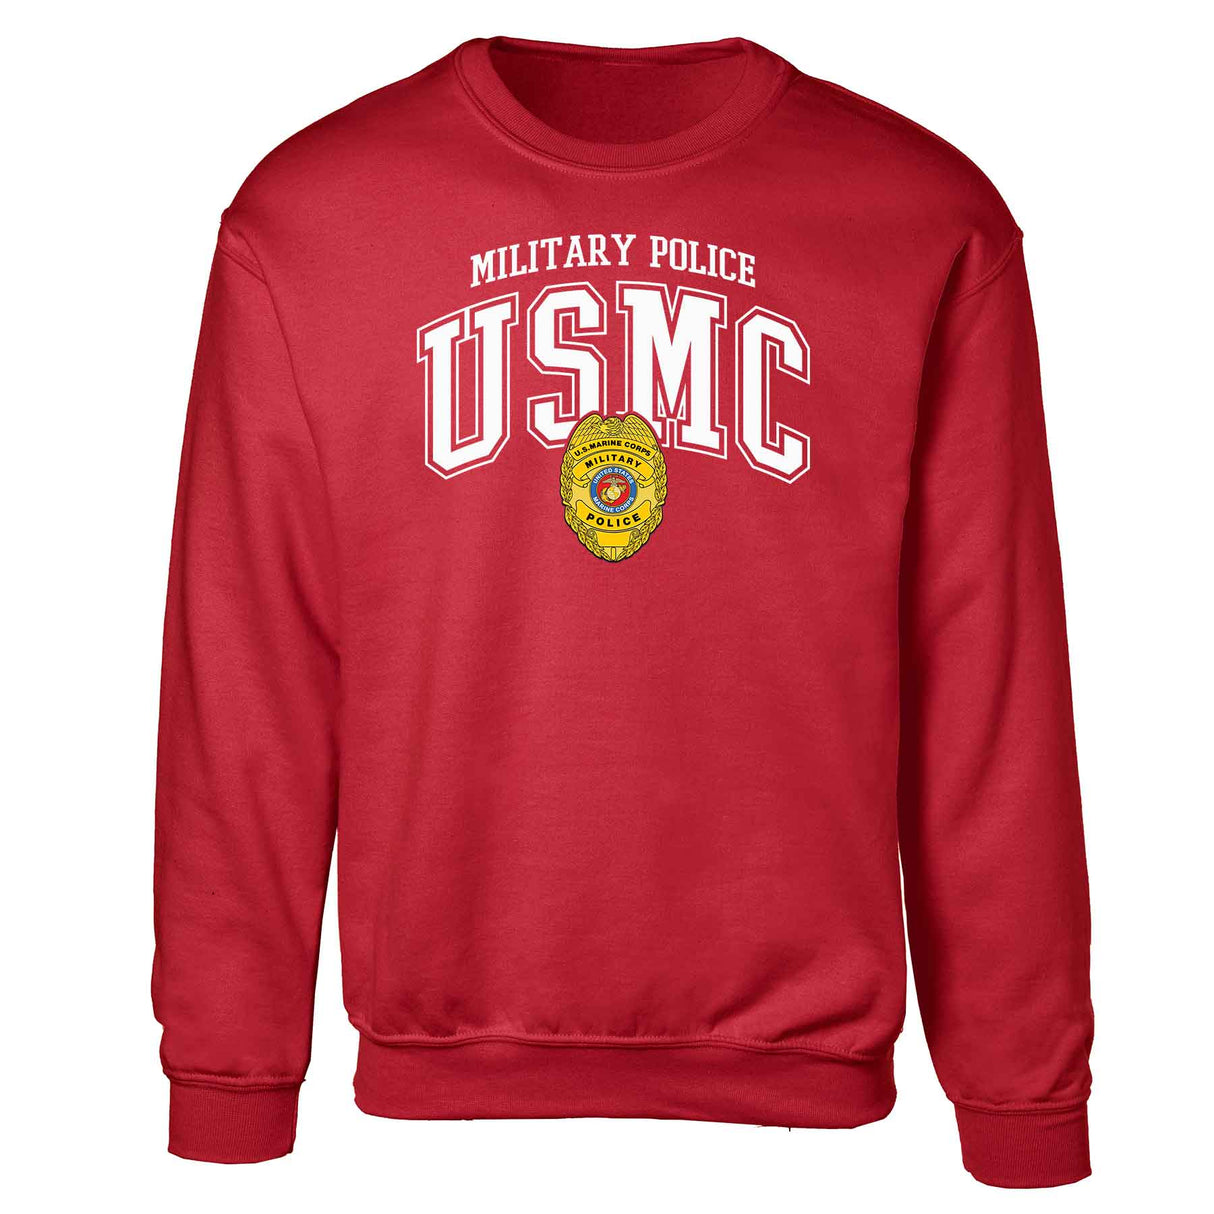 Military Police Badge Arched Sweatshirt - SGT GRIT